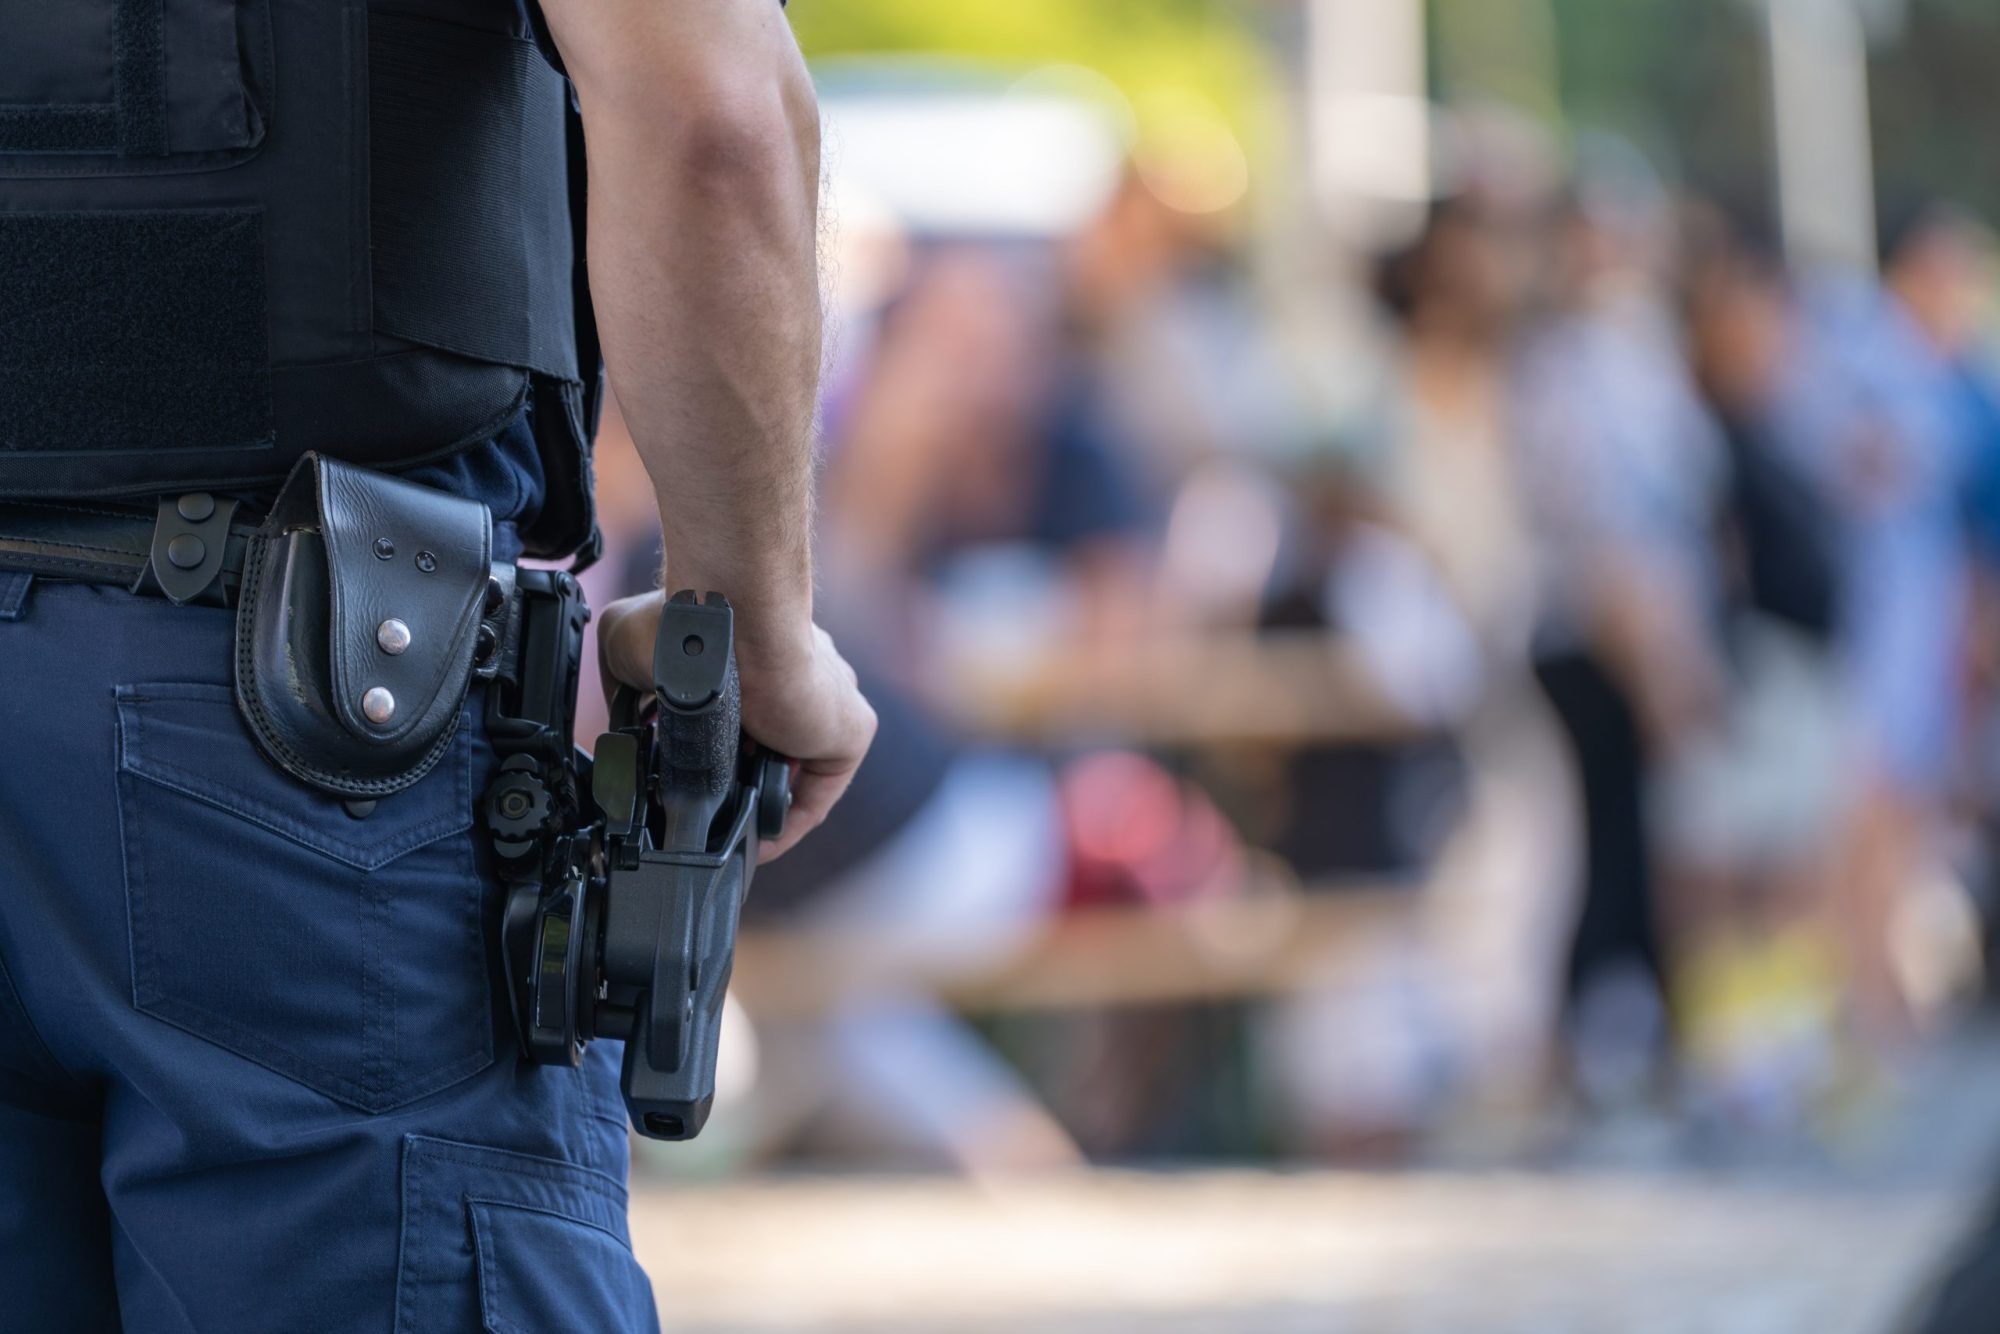 Police officer with weapon stock photo via Getty Images